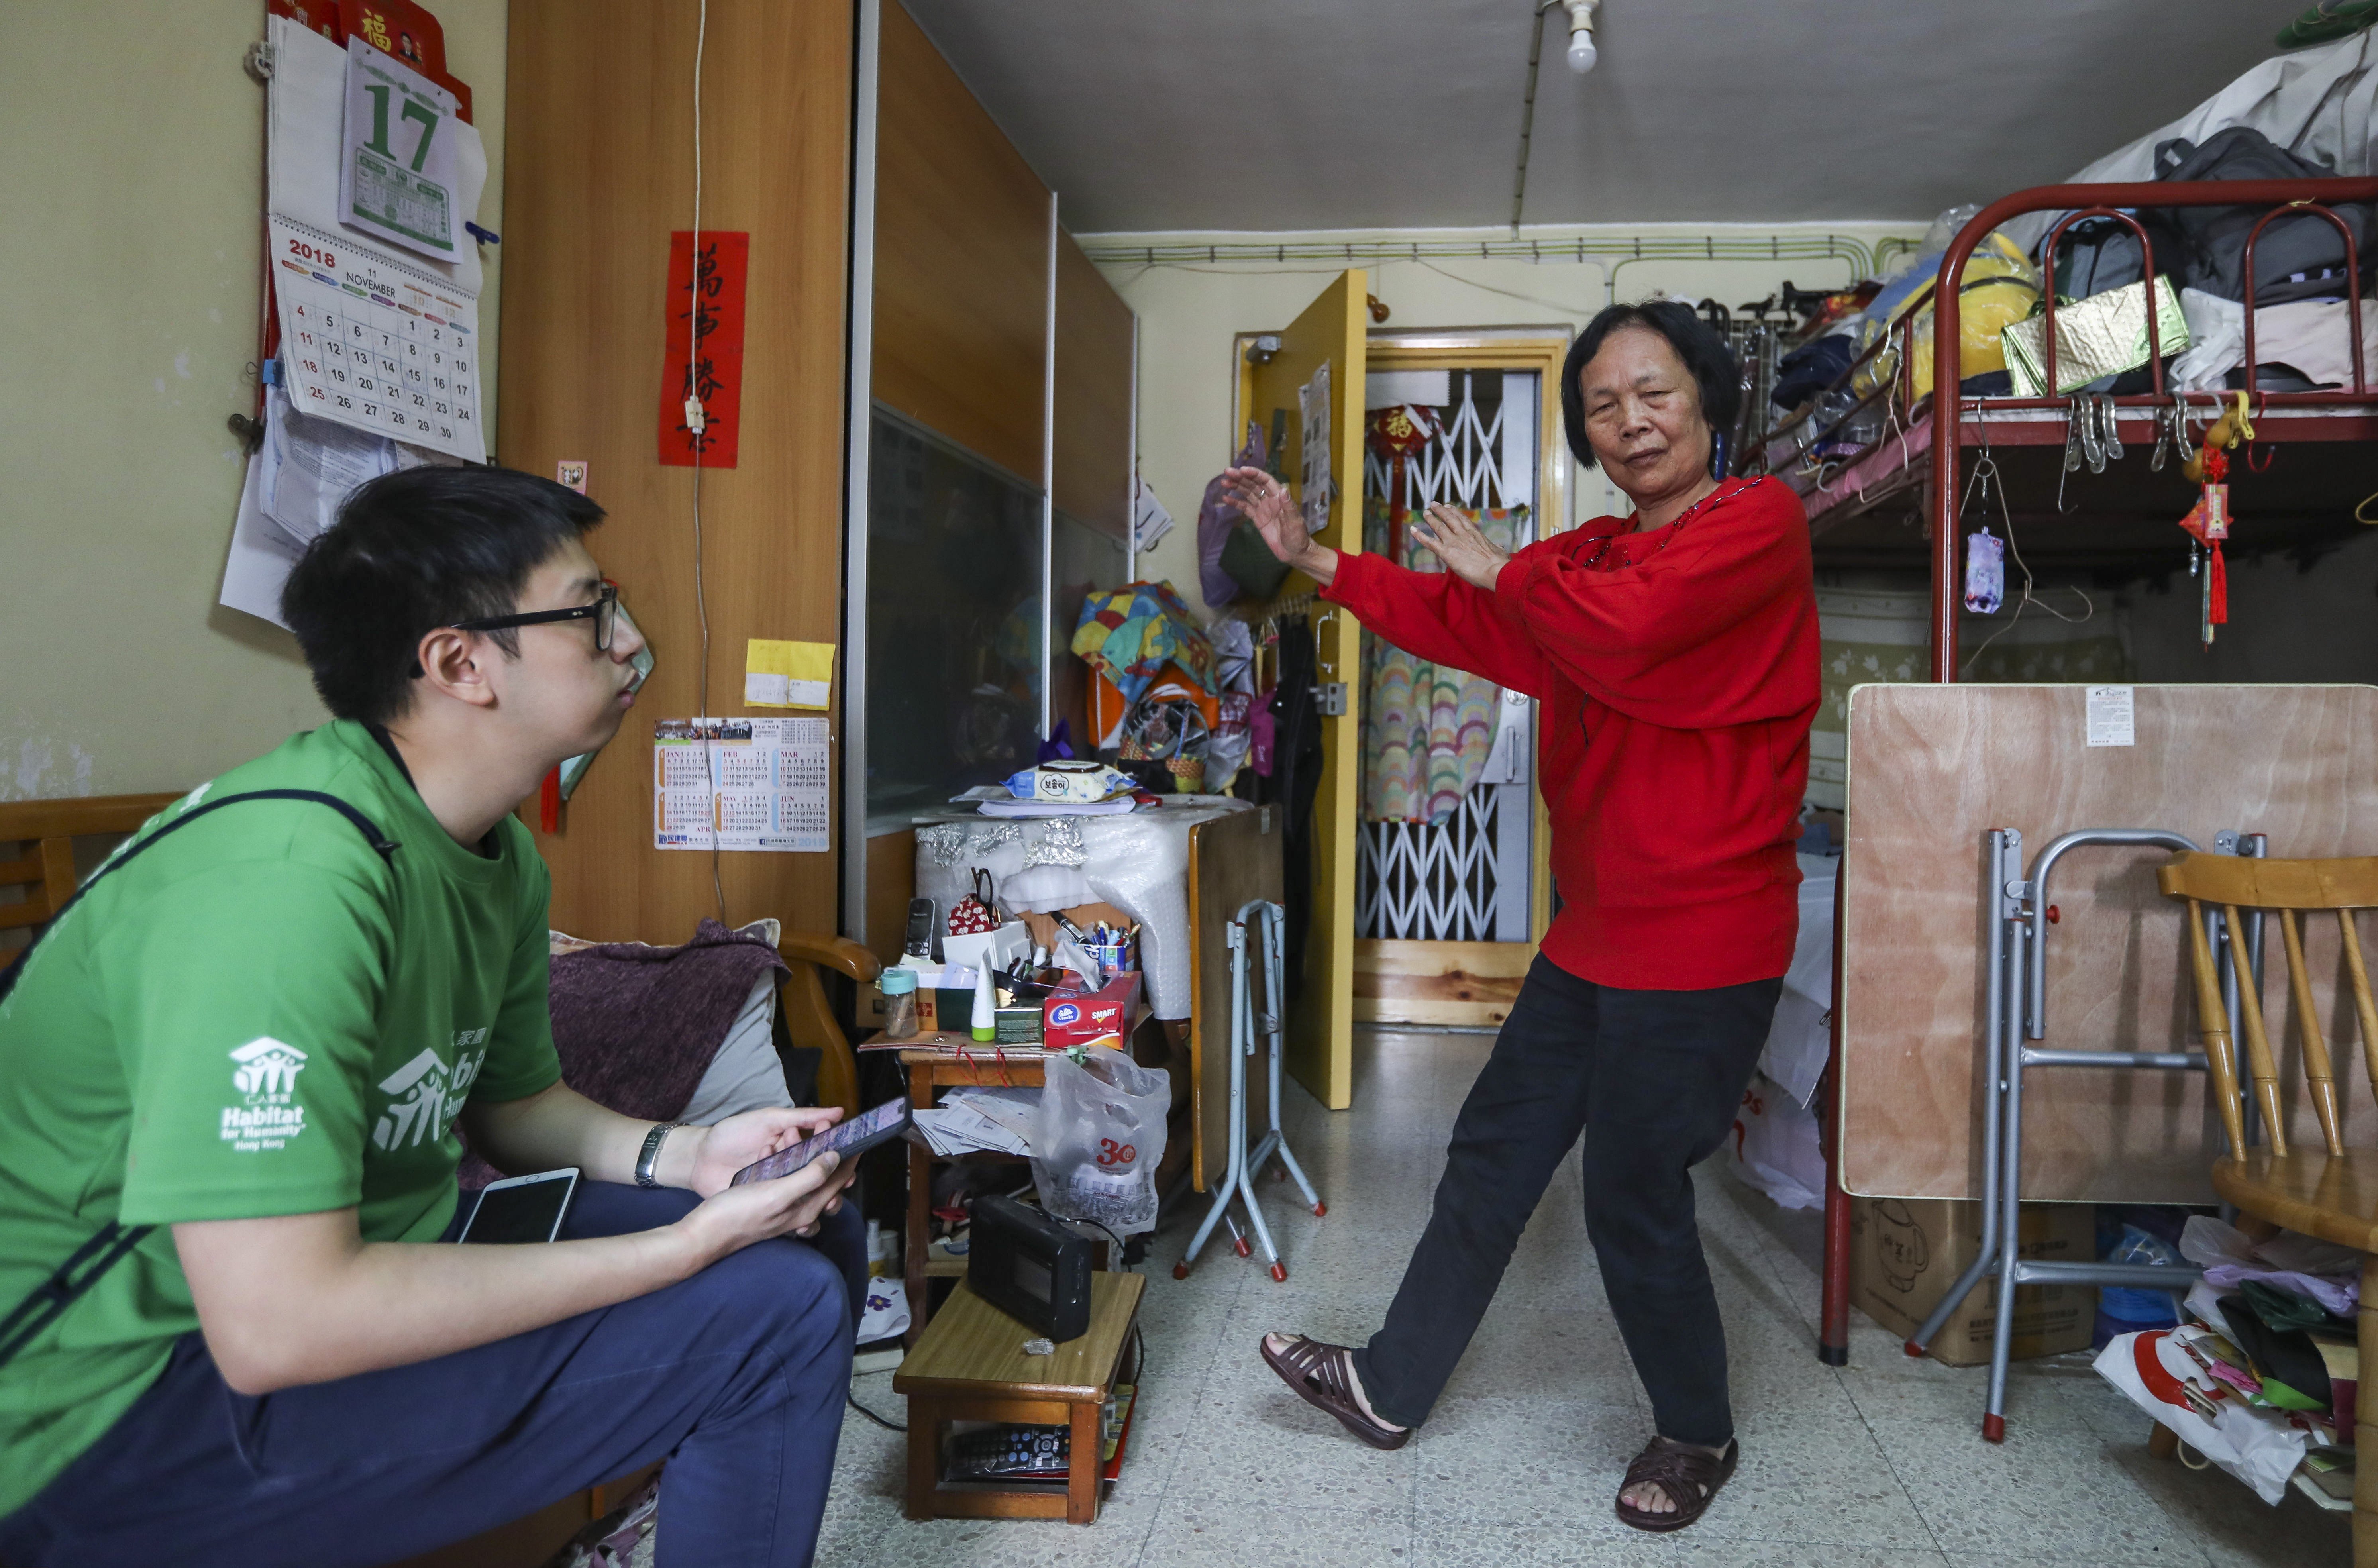 Ng Sau-fung (right), a beneficiary of Habitat for Humanity Hong Kong, shows off her tai chi moves in her home. Photo: Xiaomei Chen